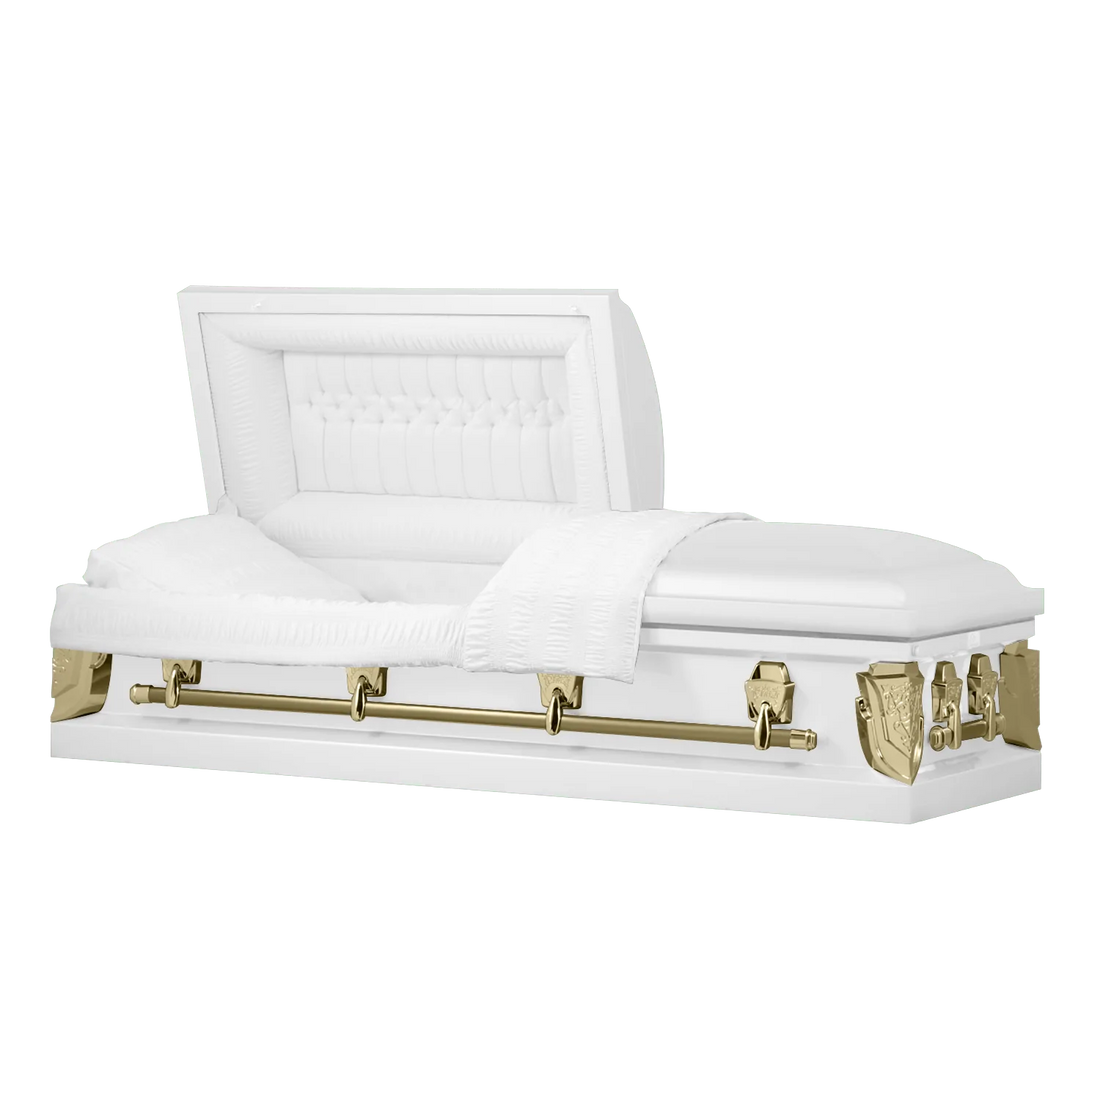 When and how to buy a white color casket?